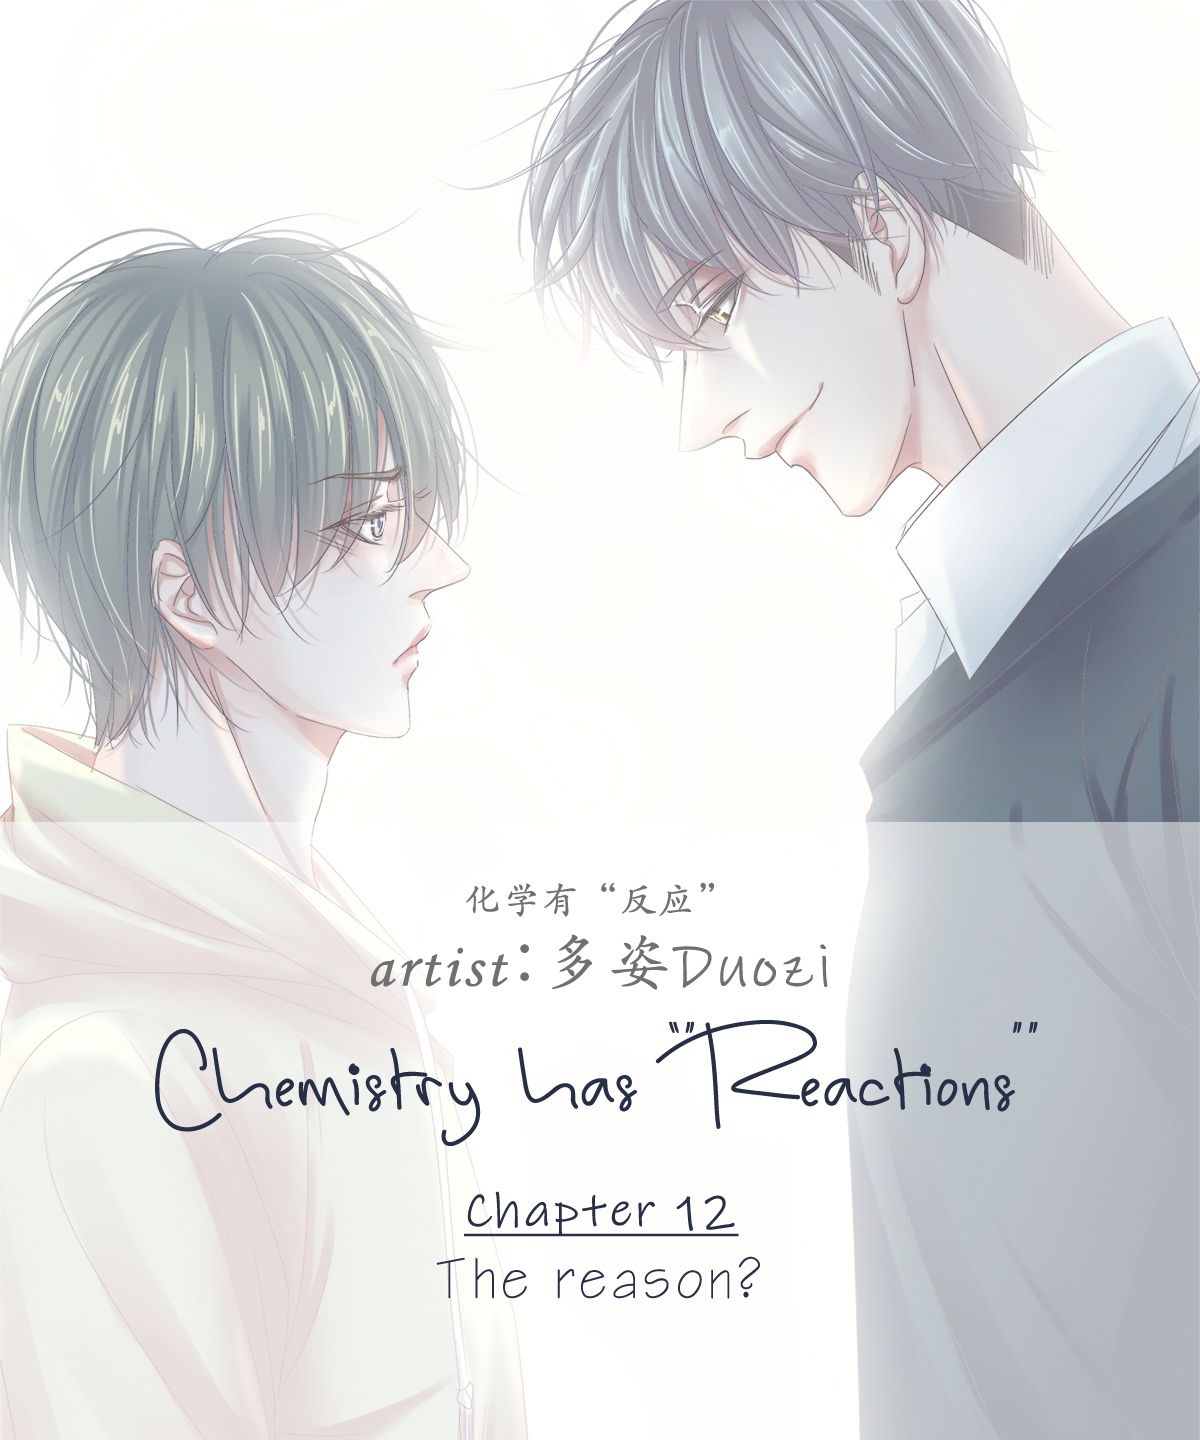 Chemistry has "Reactions" Vol. 1 Ch. 12